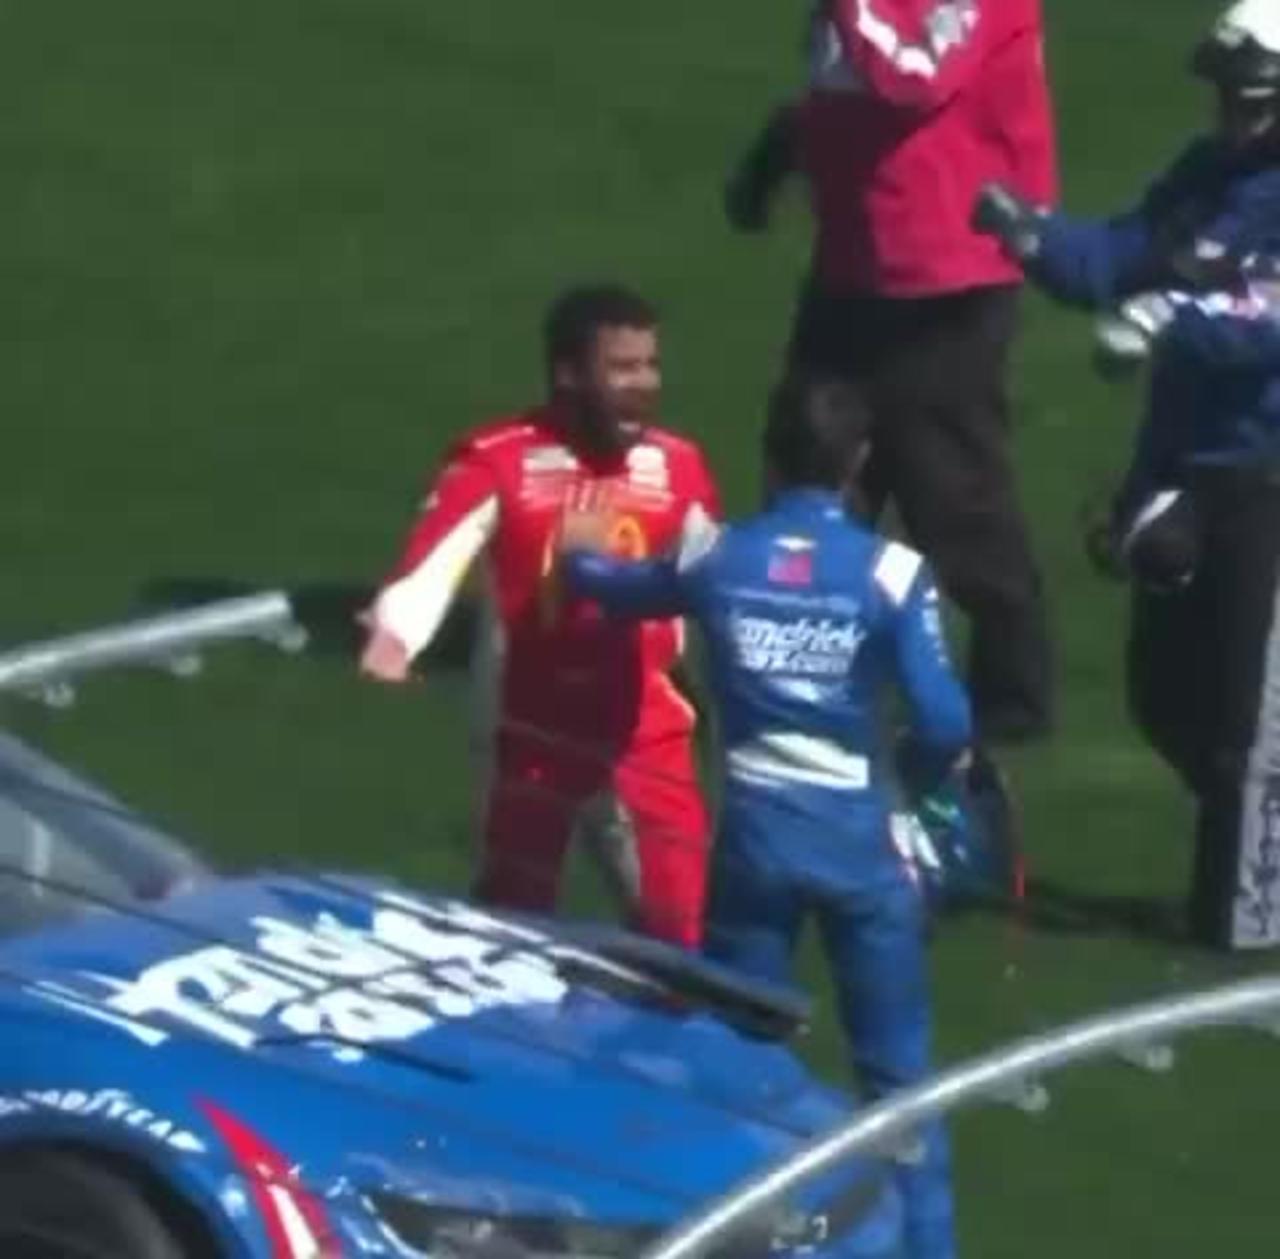 Ghetto antics prevail on track after pro BLM, hate hoaxer Bubba Wallace causes crash and assaults team mate.